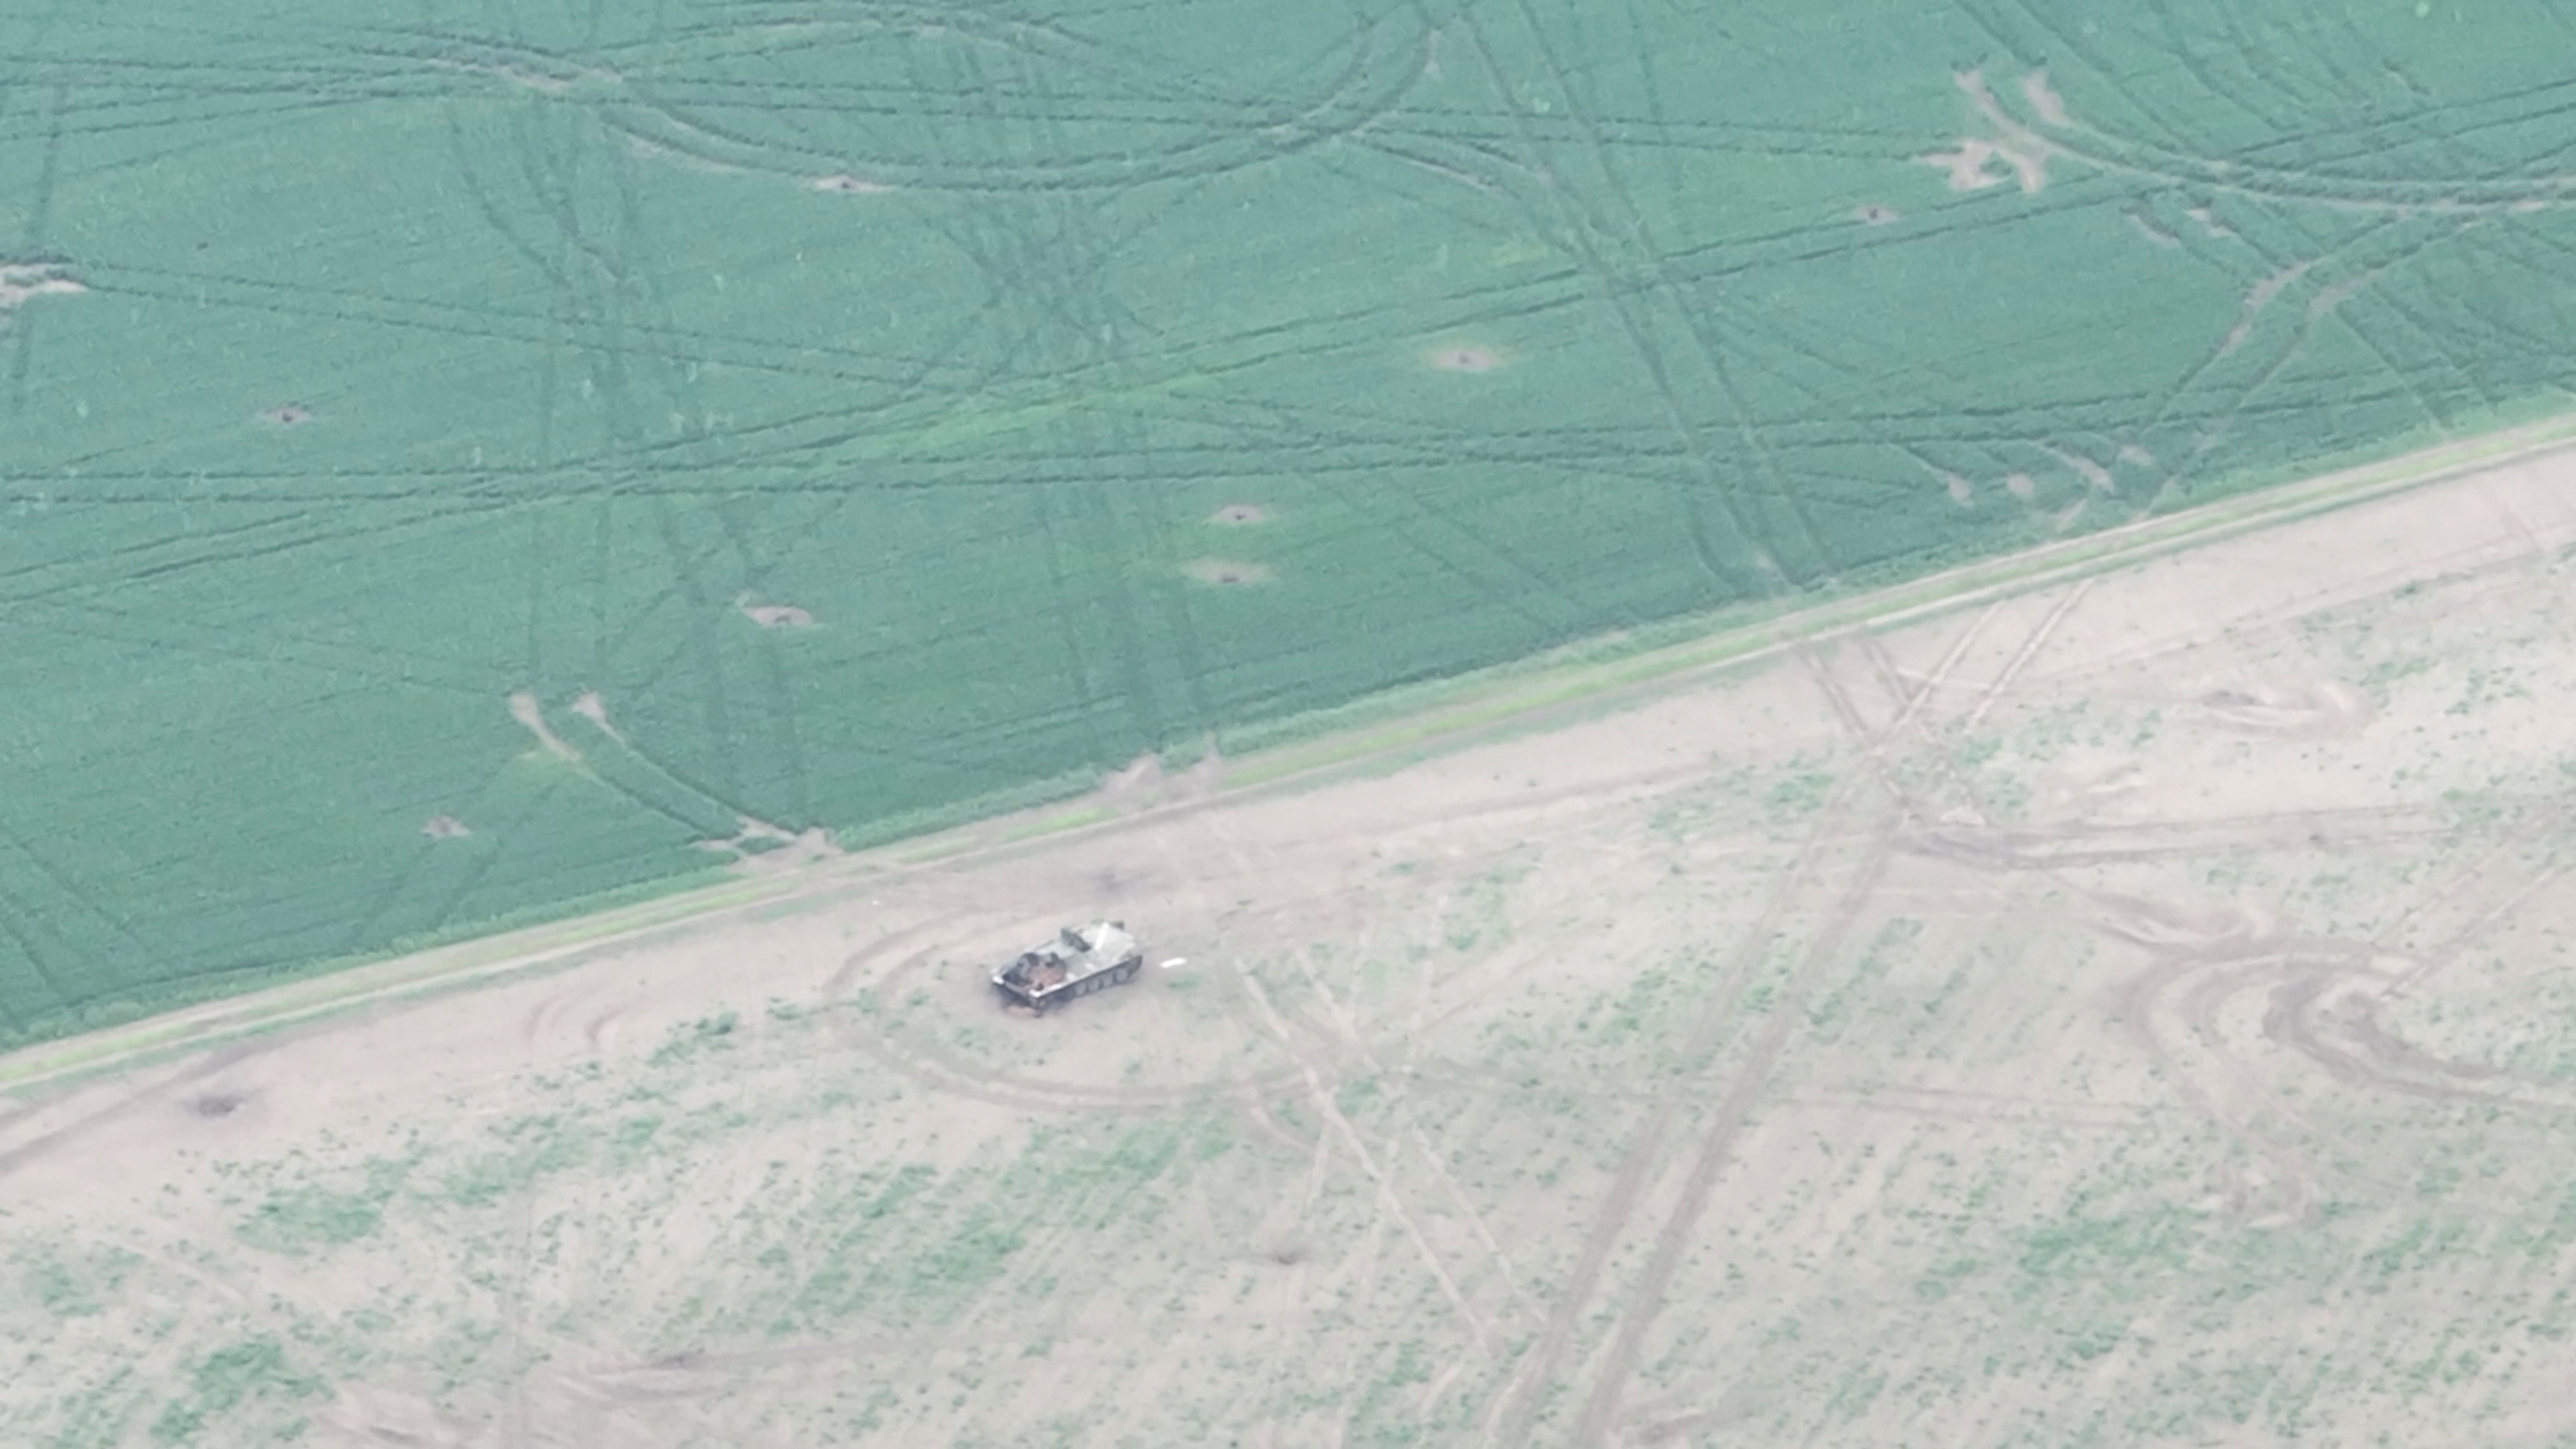 Drone footage shows a military vehicle in a field in Oleksandrivka, Kherson region